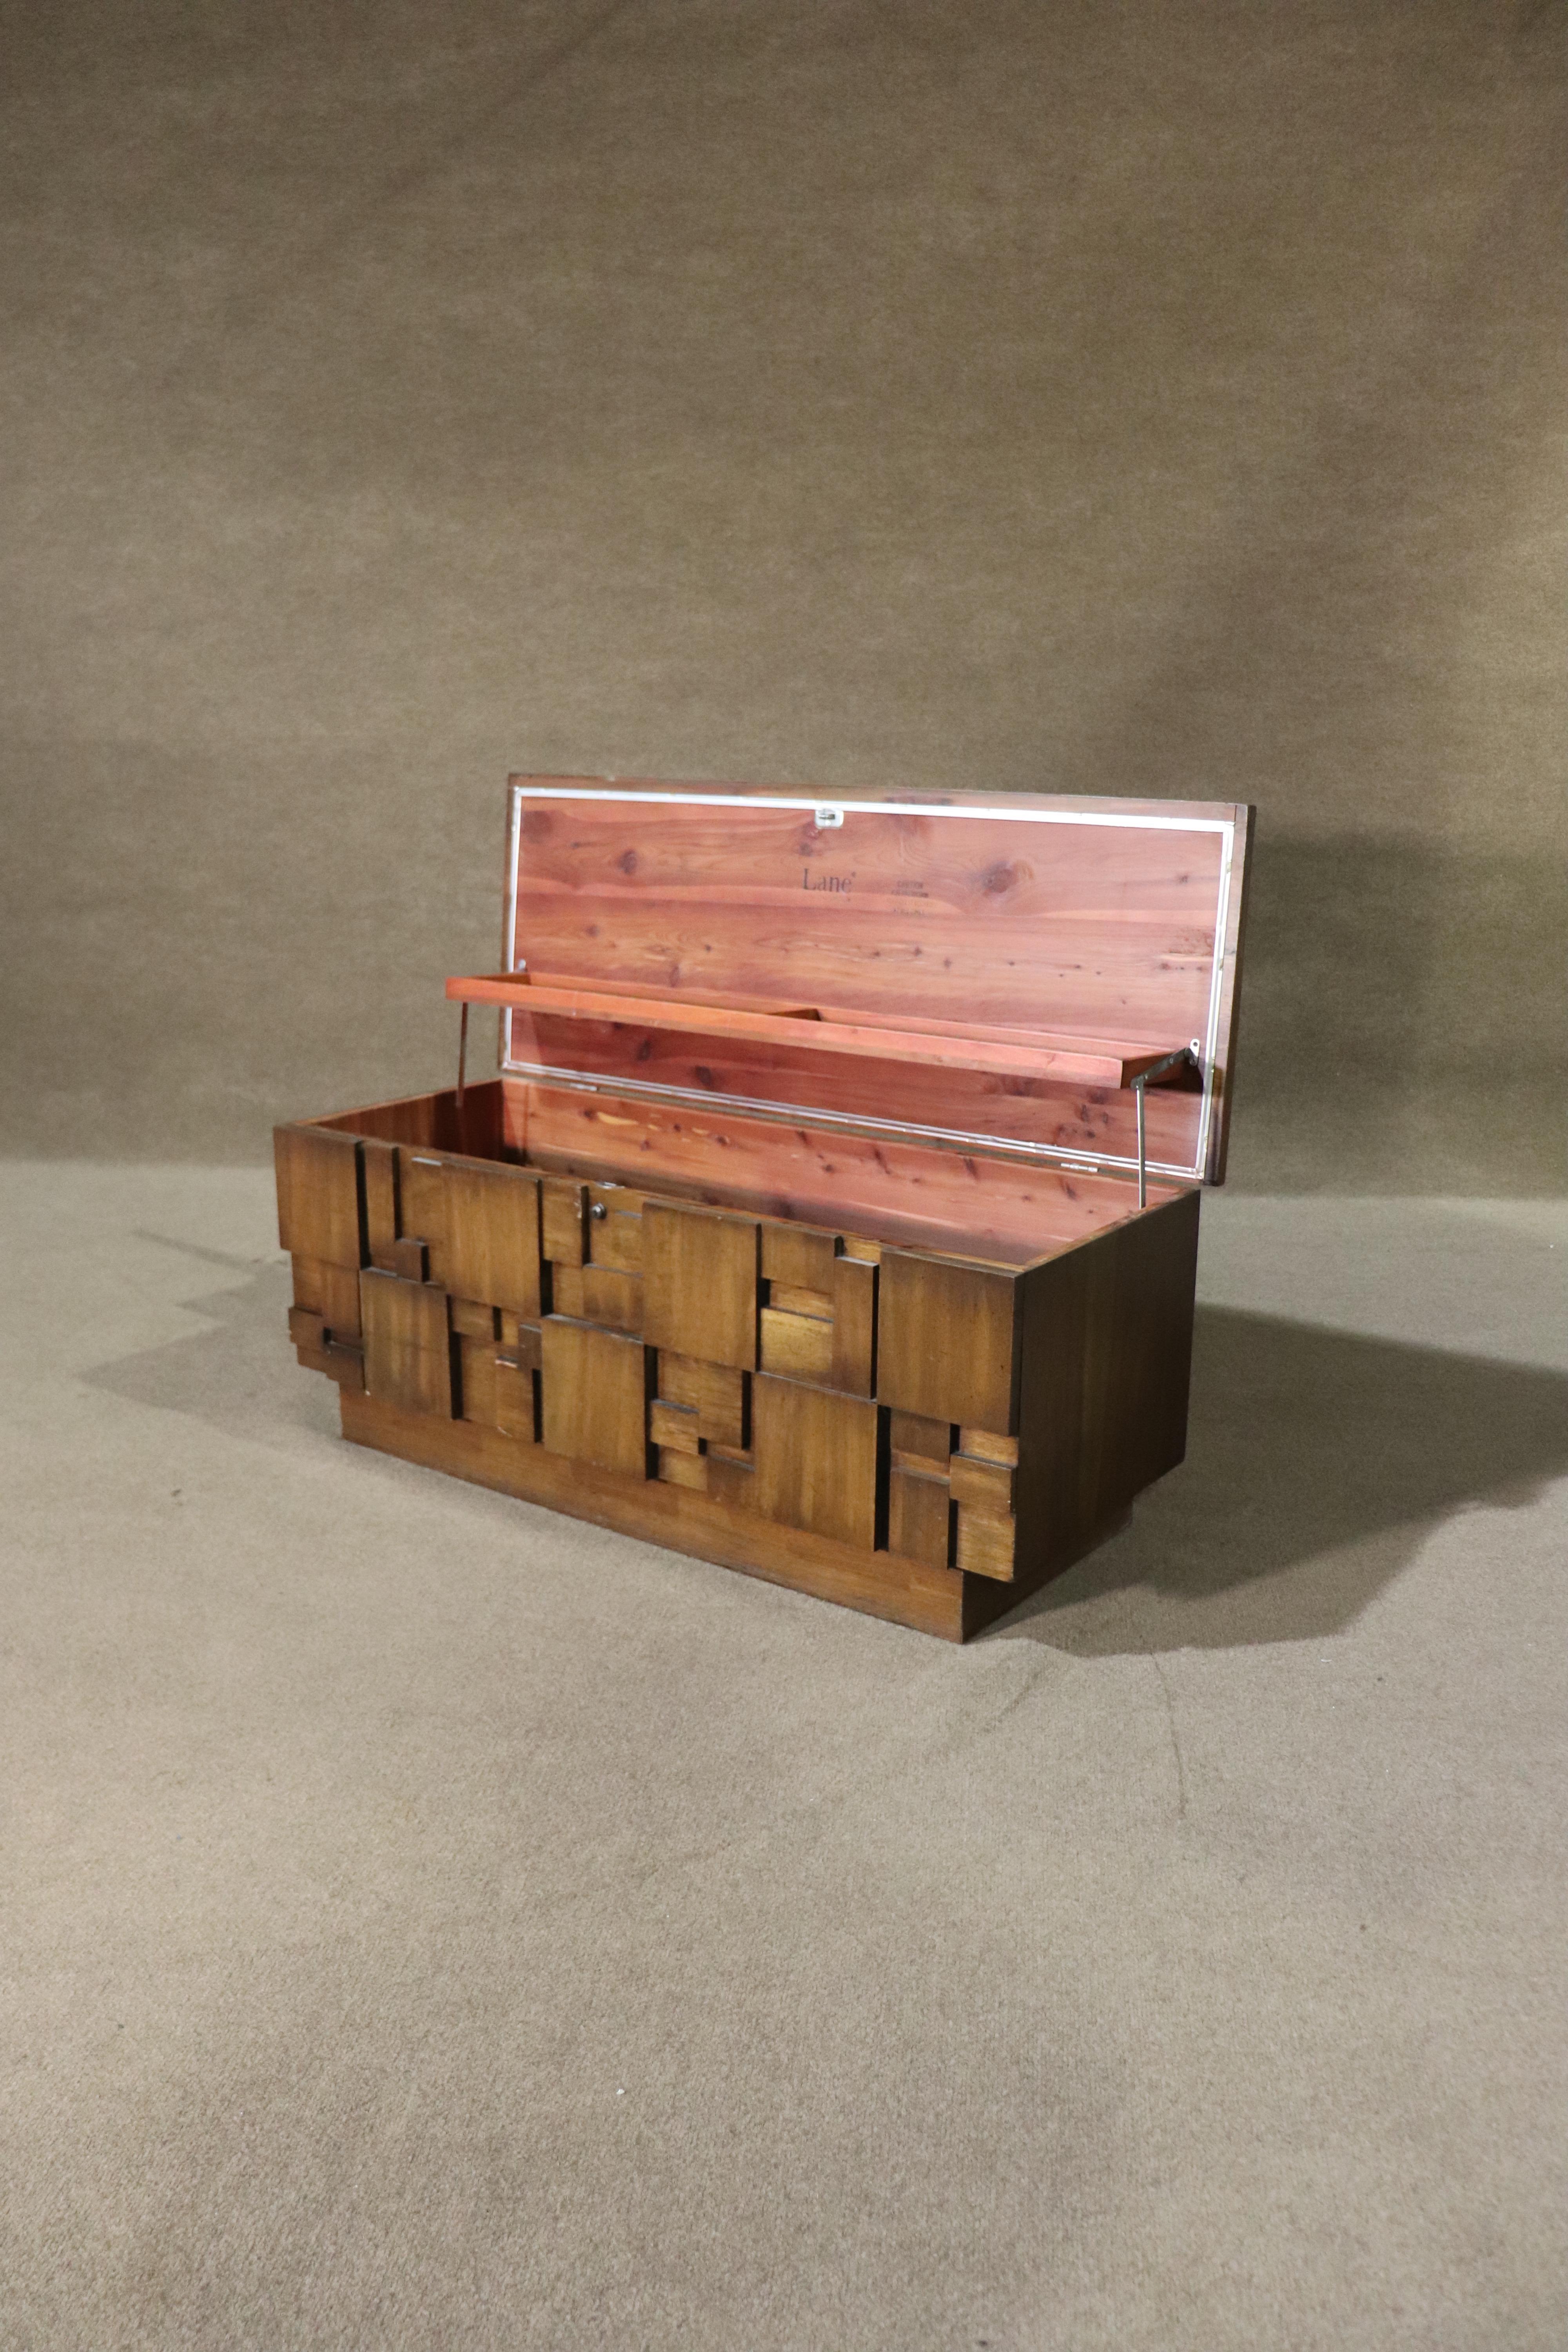 Three dimensional mid-century modern cedar chest by Lane Furniture. Part of their 'Staccato' line, which features a mosaic front, push button top, and cedar lined inside.
Please confirm location NY or NJ